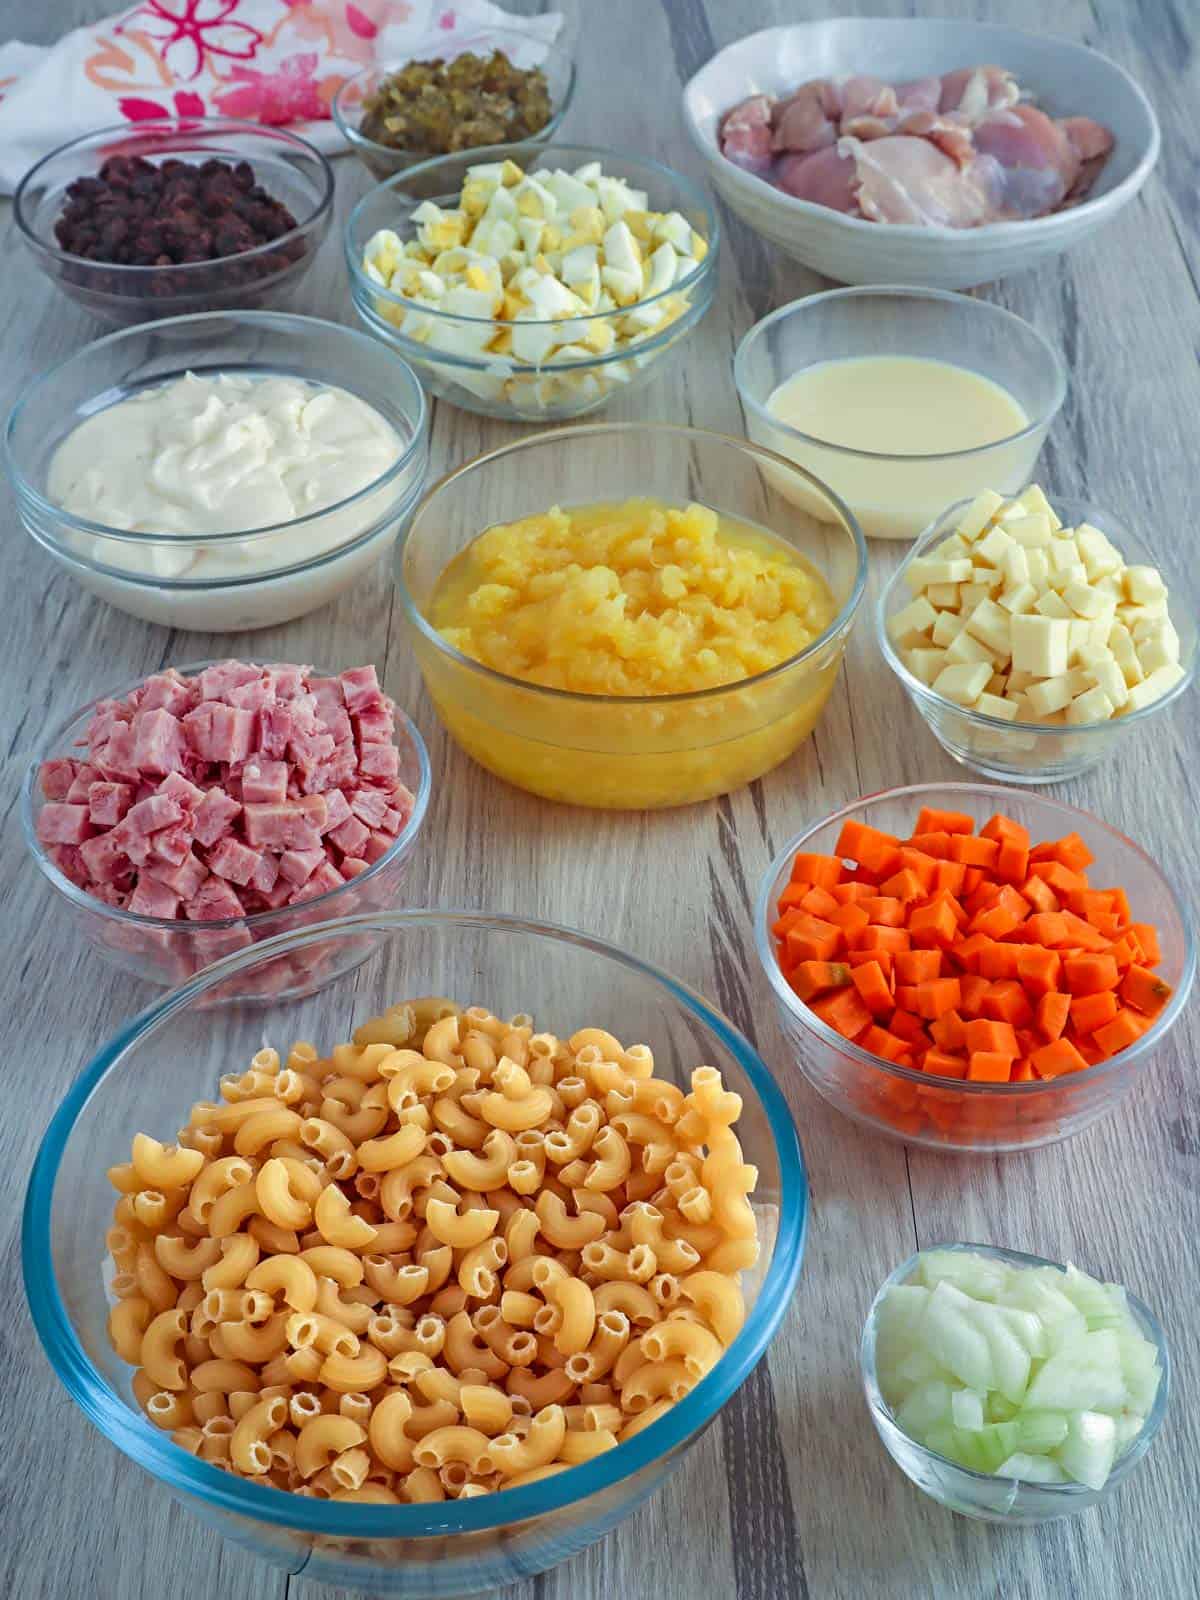 macaroni, diced ham, crushed pineapple, cheese cubes, diced carrots, chopped eggs, mayonnaise, sweet pickle relish, chopped onions, raisins